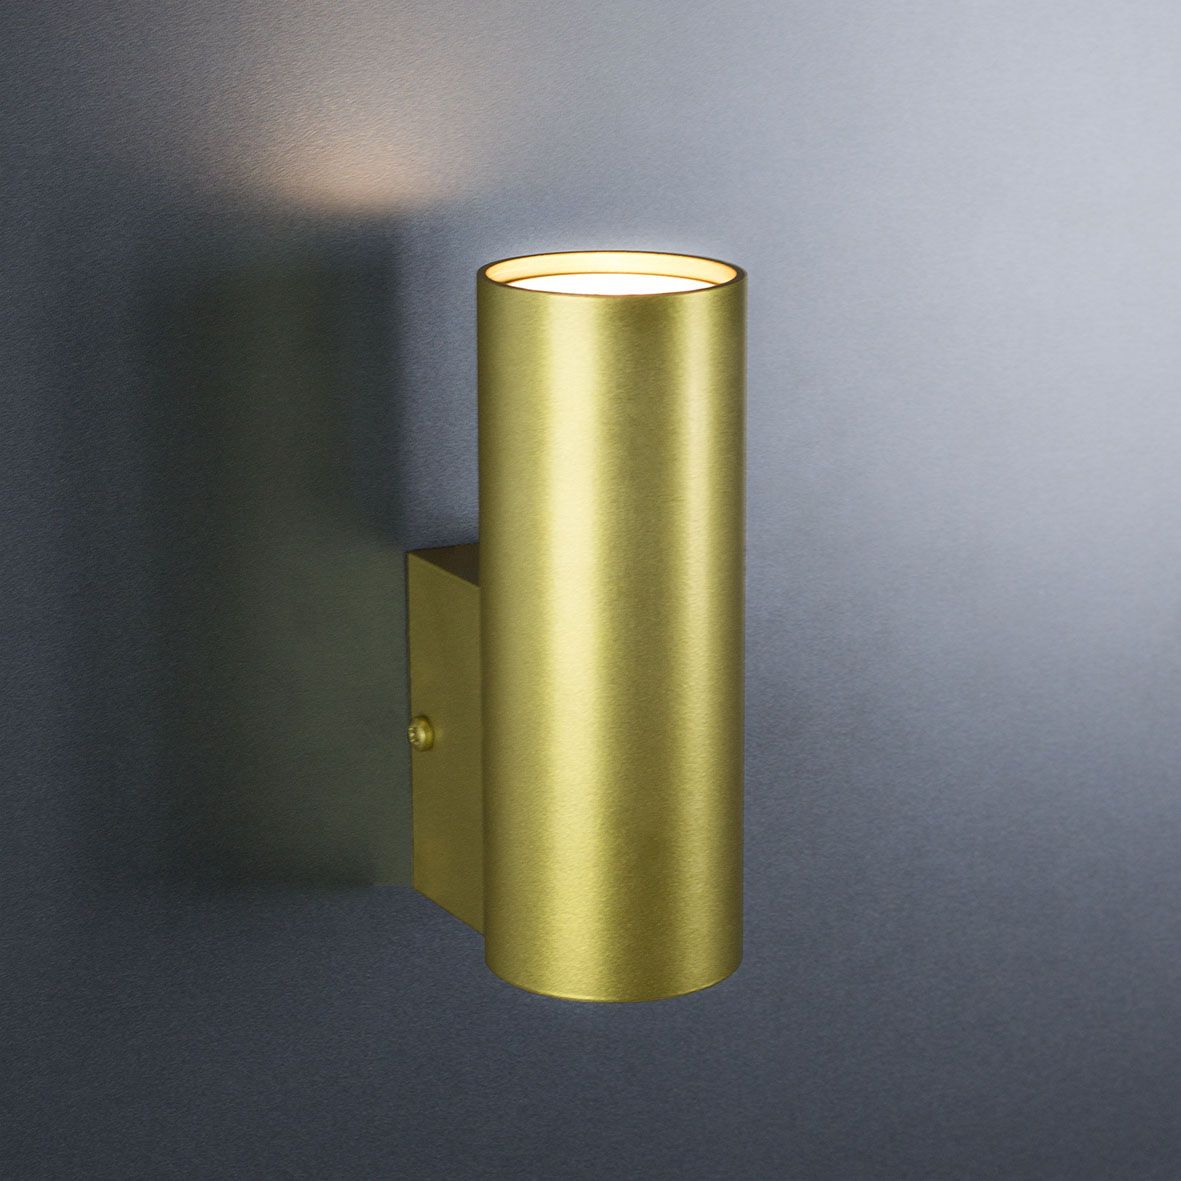 Wall Sconce Accent Imperium Light gold